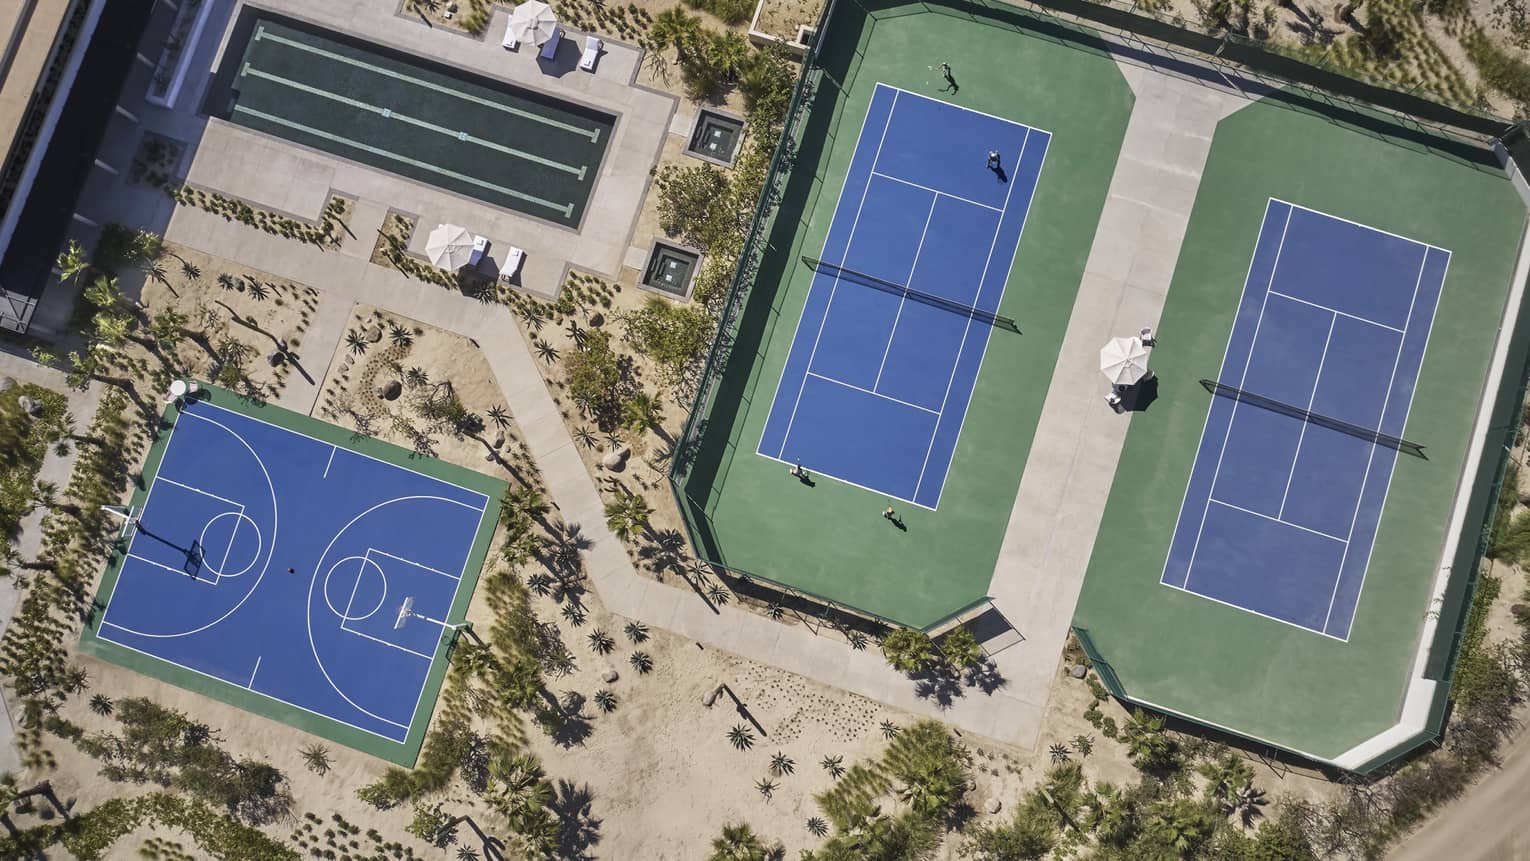 Aerial view of two green and blue tennis courts, one long rectangular pool and one blue basketball court surrounded by sand and greenery